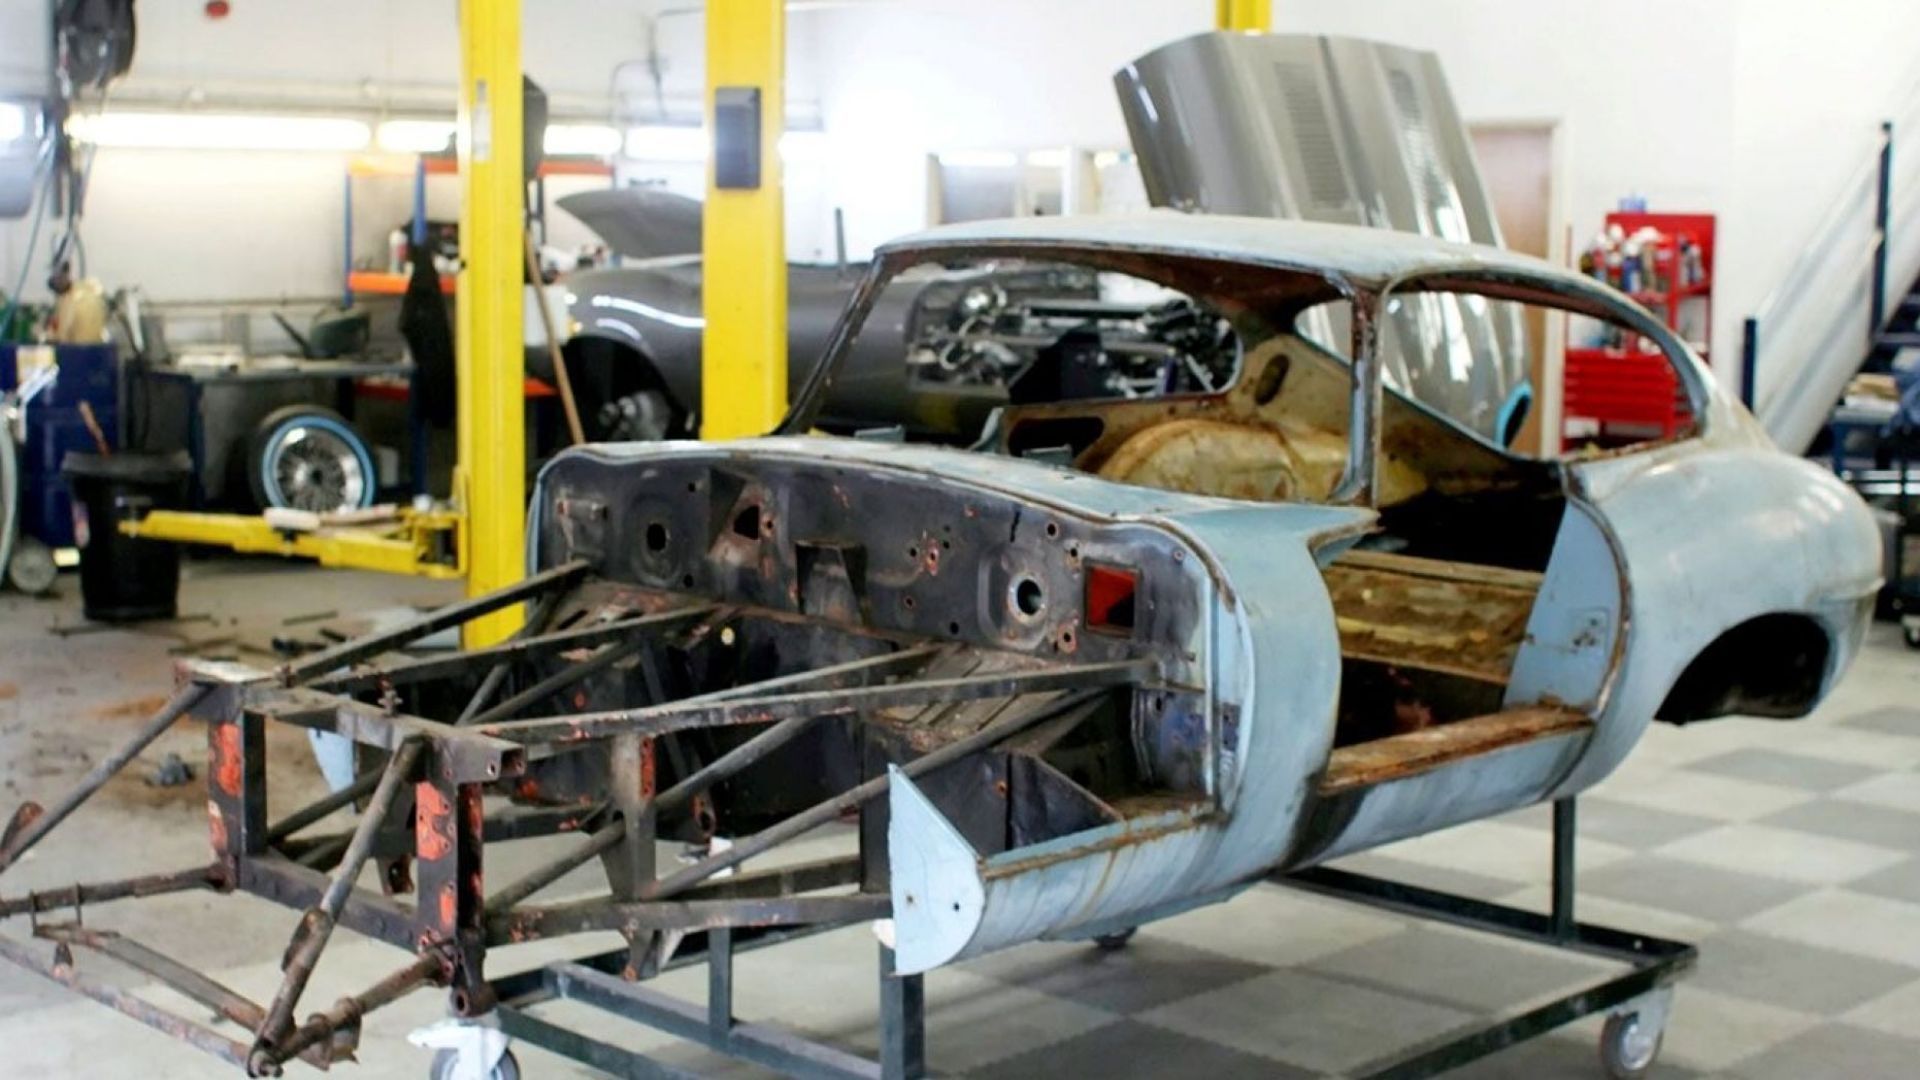 1964 Jaguar E-Type Rises From Rotting Barn Find To $250,000 Market Value 